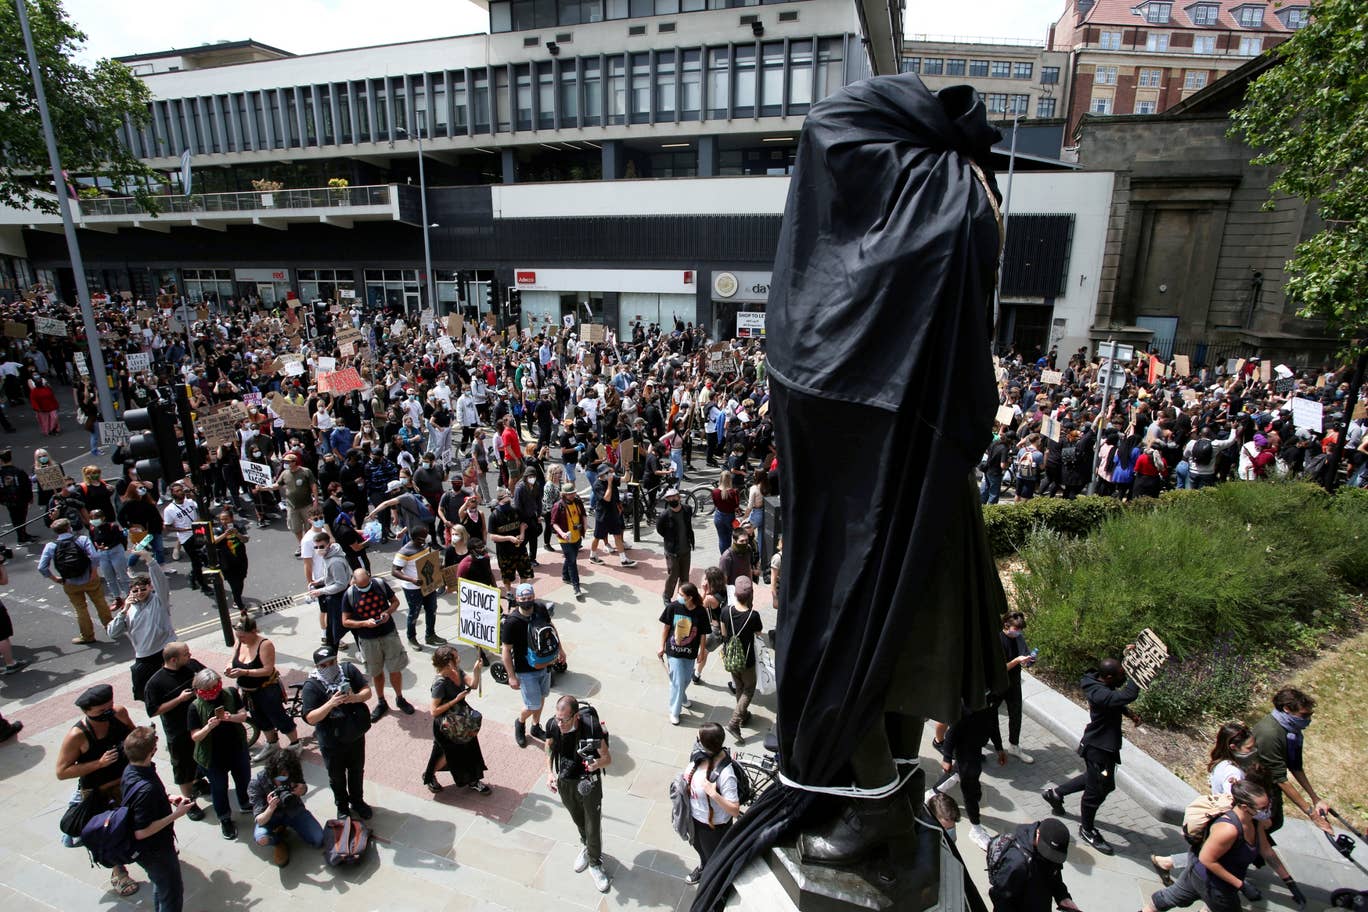 bristol black lives matter protesters throw slave trader statue into harbor after pulling it down